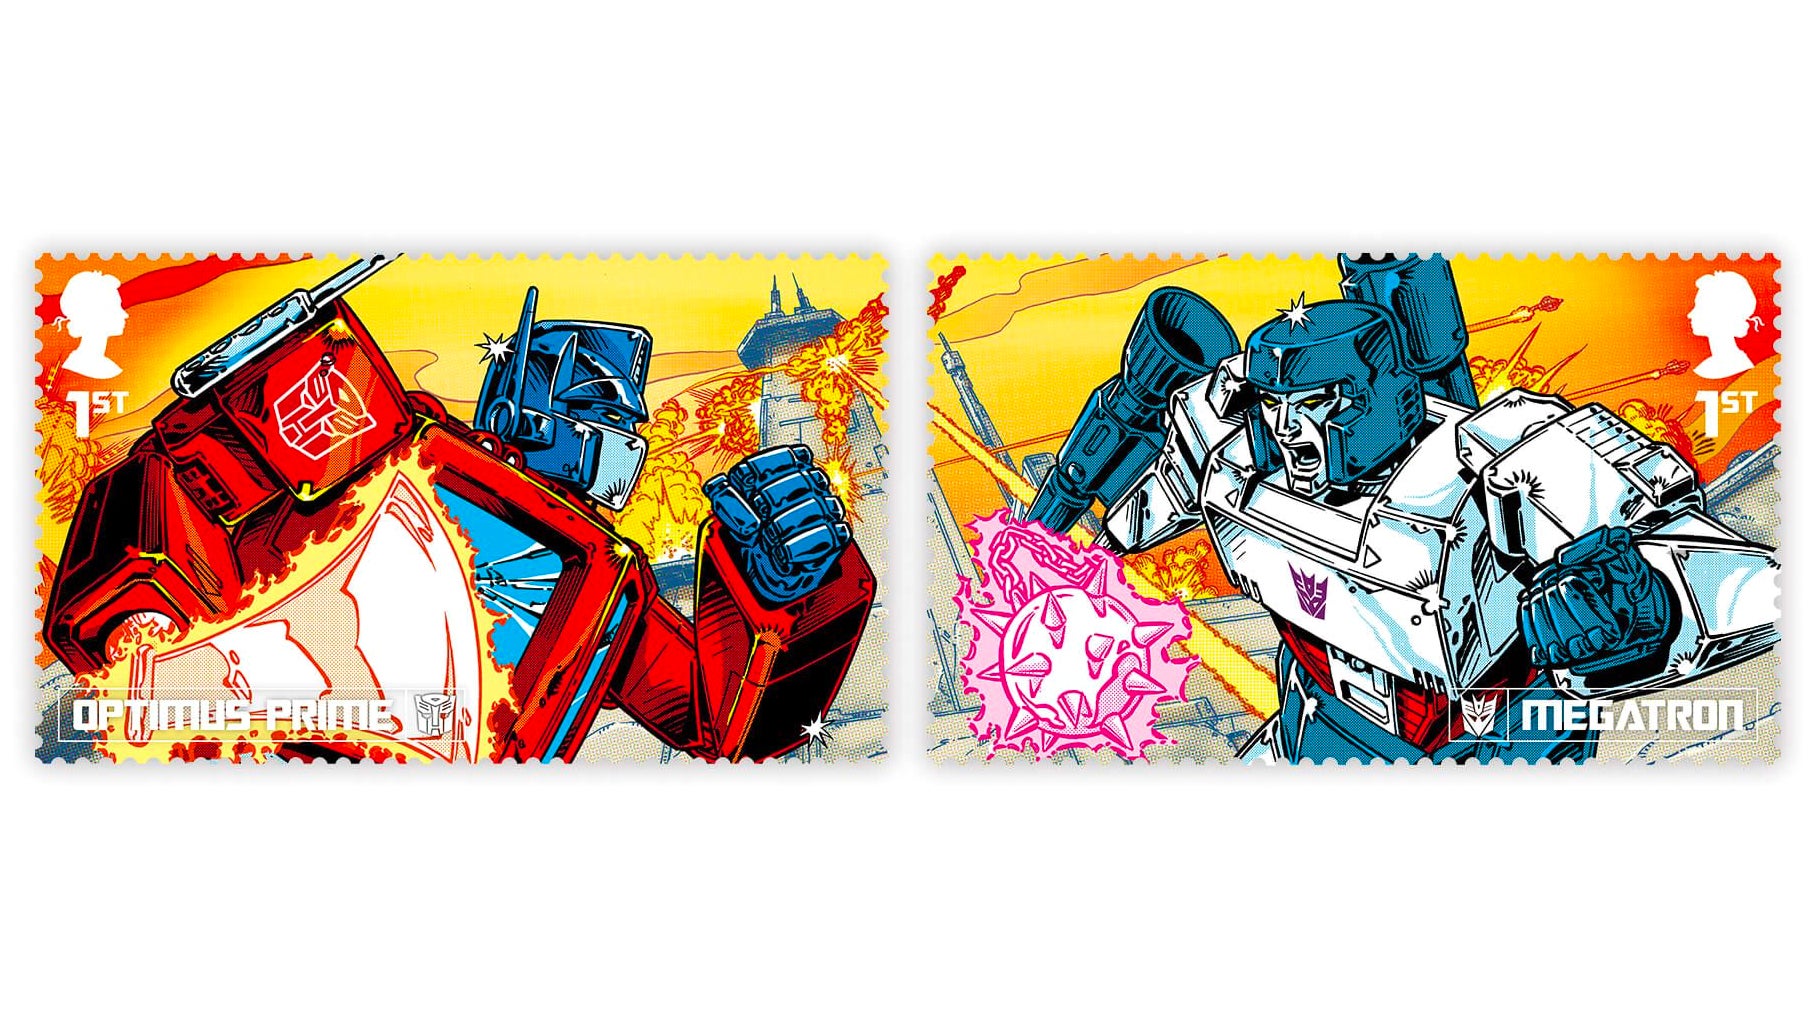 Like the Transformers, These New Stamps Reveal More Than Meets The Eye